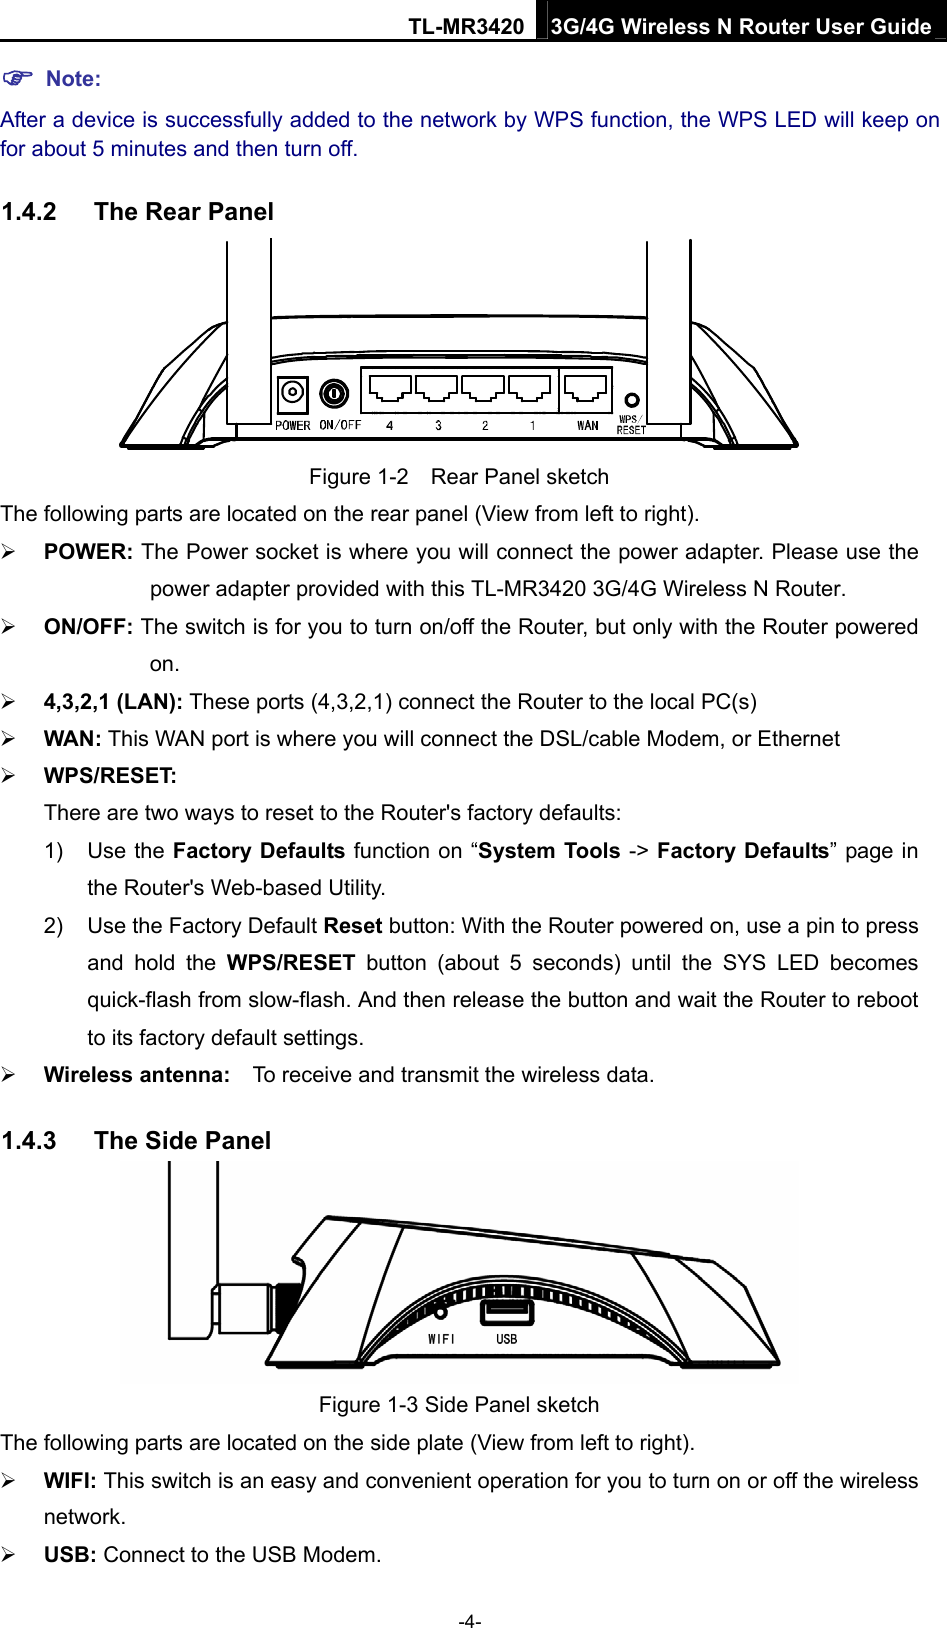 TL-MR3420 3G/4G Wireless N Router User Guide  Note: After a device is successfully added to the network by WPS function, the WPS LED will keep on for about 5 minutes and then turn off. 1.4.2  The Rear Panel    Figure 1-2    Rear Panel sketch The following parts are located on the rear panel (View from left to right).  POWER: The Power socket is where you will connect the power adapter. Please use the power adapter provided with this TL-MR3420 3G/4G Wireless N Router.    ON/OFF: The switch is for you to turn on/off the Router, but only with the Router powered on.  4,3,2,1 (LAN): These ports (4,3,2,1) connect the Router to the local PC(s)  WAN: This WAN port is where you will connect the DSL/cable Modem, or Ethernet    WPS/RESET: There are two ways to reset to the Router&apos;s factory defaults: 1) Use the Factory Defaults function on “System Tools -&gt; Factory Defaults” page in the Router&apos;s Web-based Utility. 2)  Use the Factory Default Reset button: With the Router powered on, use a pin to press and hold the WPS/RESET button (about 5 seconds) until the SYS LED becomes quick-flash from slow-flash. And then release the button and wait the Router to reboot to its factory default settings.  Wireless antenna:    To receive and transmit the wireless data. 1.4.3  The Side Panel  Figure 1-3 Side Panel sketch The following parts are located on the side plate (View from left to right).  WIFI: This switch is an easy and convenient operation for you to turn on or off the wireless network.  USB: Connect to the USB Modem. -4- 